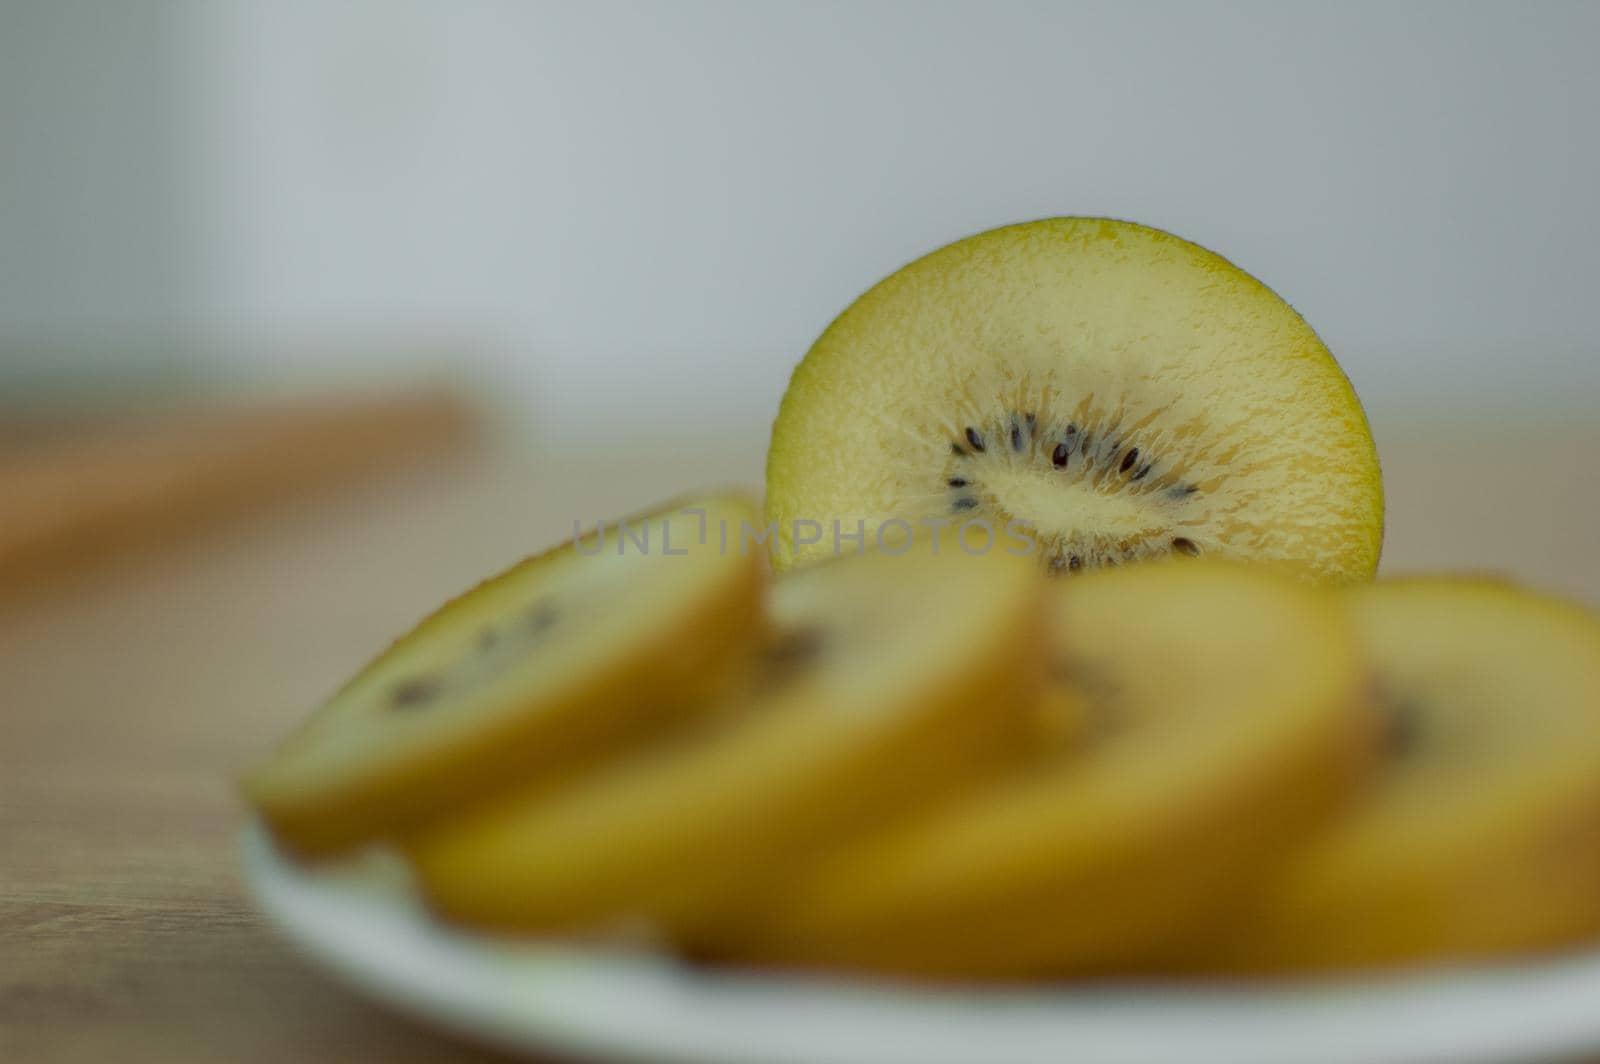 Slices of golden kiwi with yellow pulp on white plate on the kitchen. Exotic fruits, healthy eating concept.